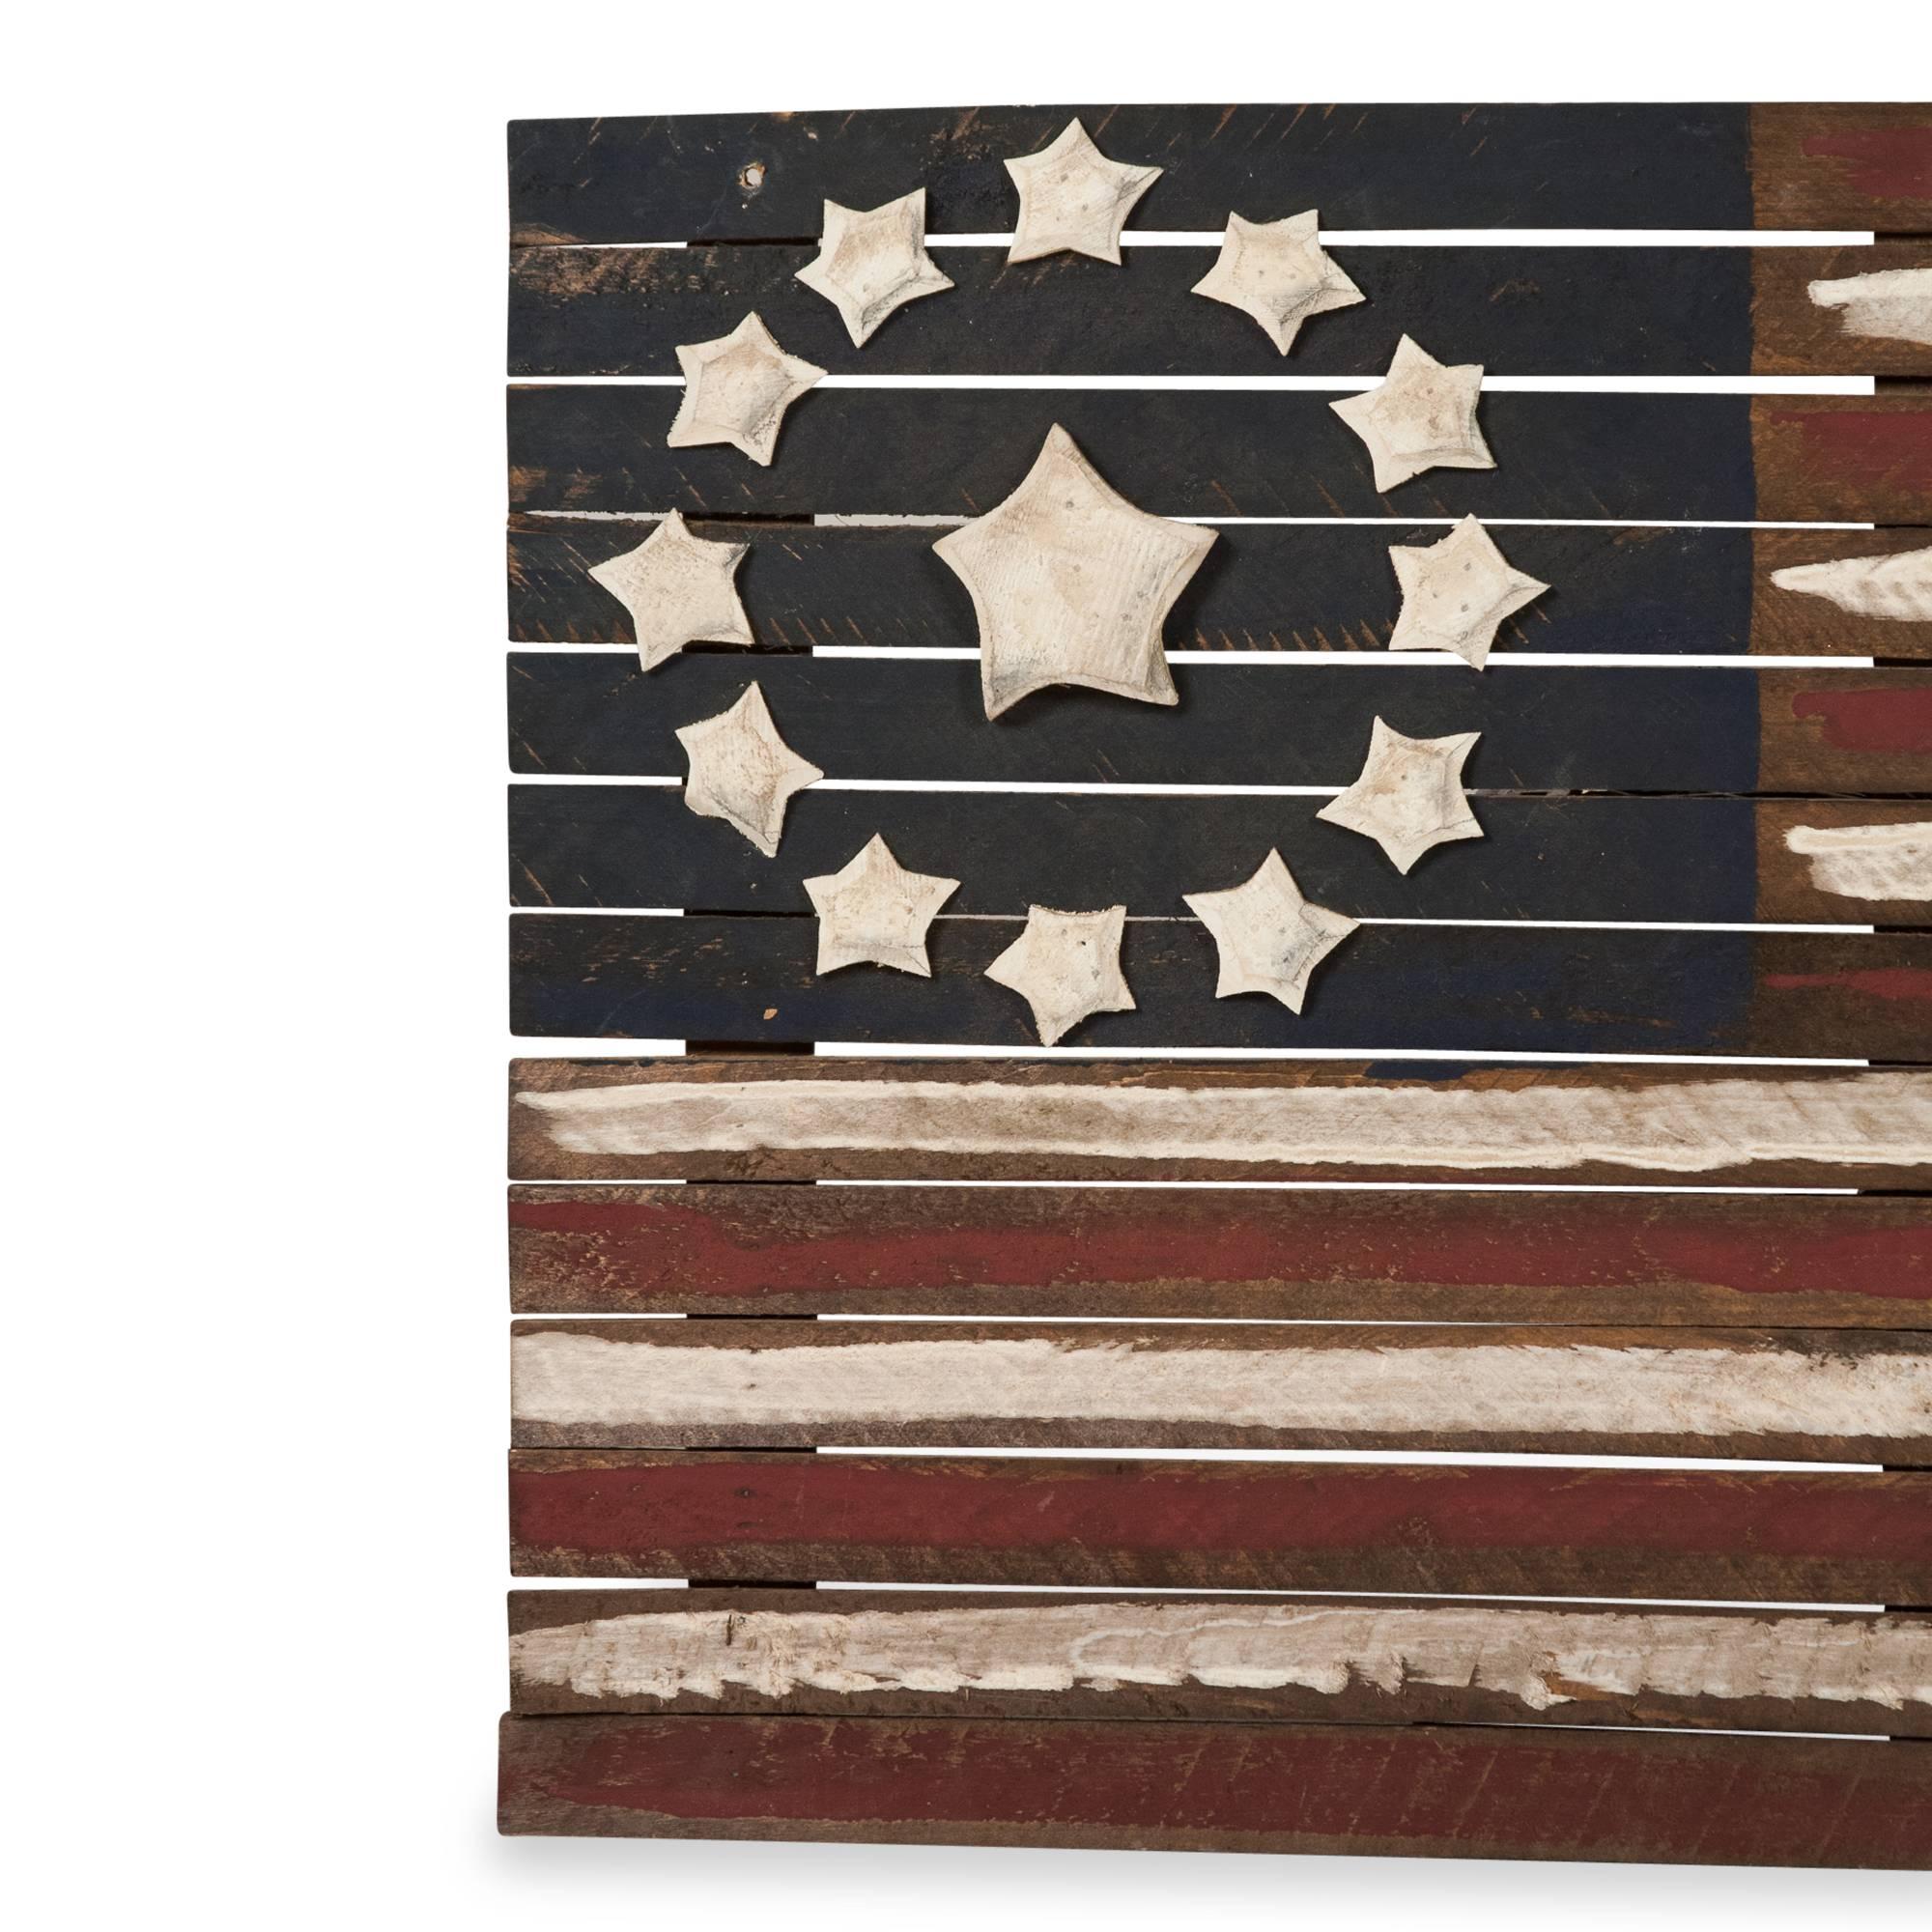 Painted folk art scrap wood American flag, with applied cut wood stars in a ring around a larger center star, American late 20th century, 32 x 19 in, depth 2 in. (Item #2309)